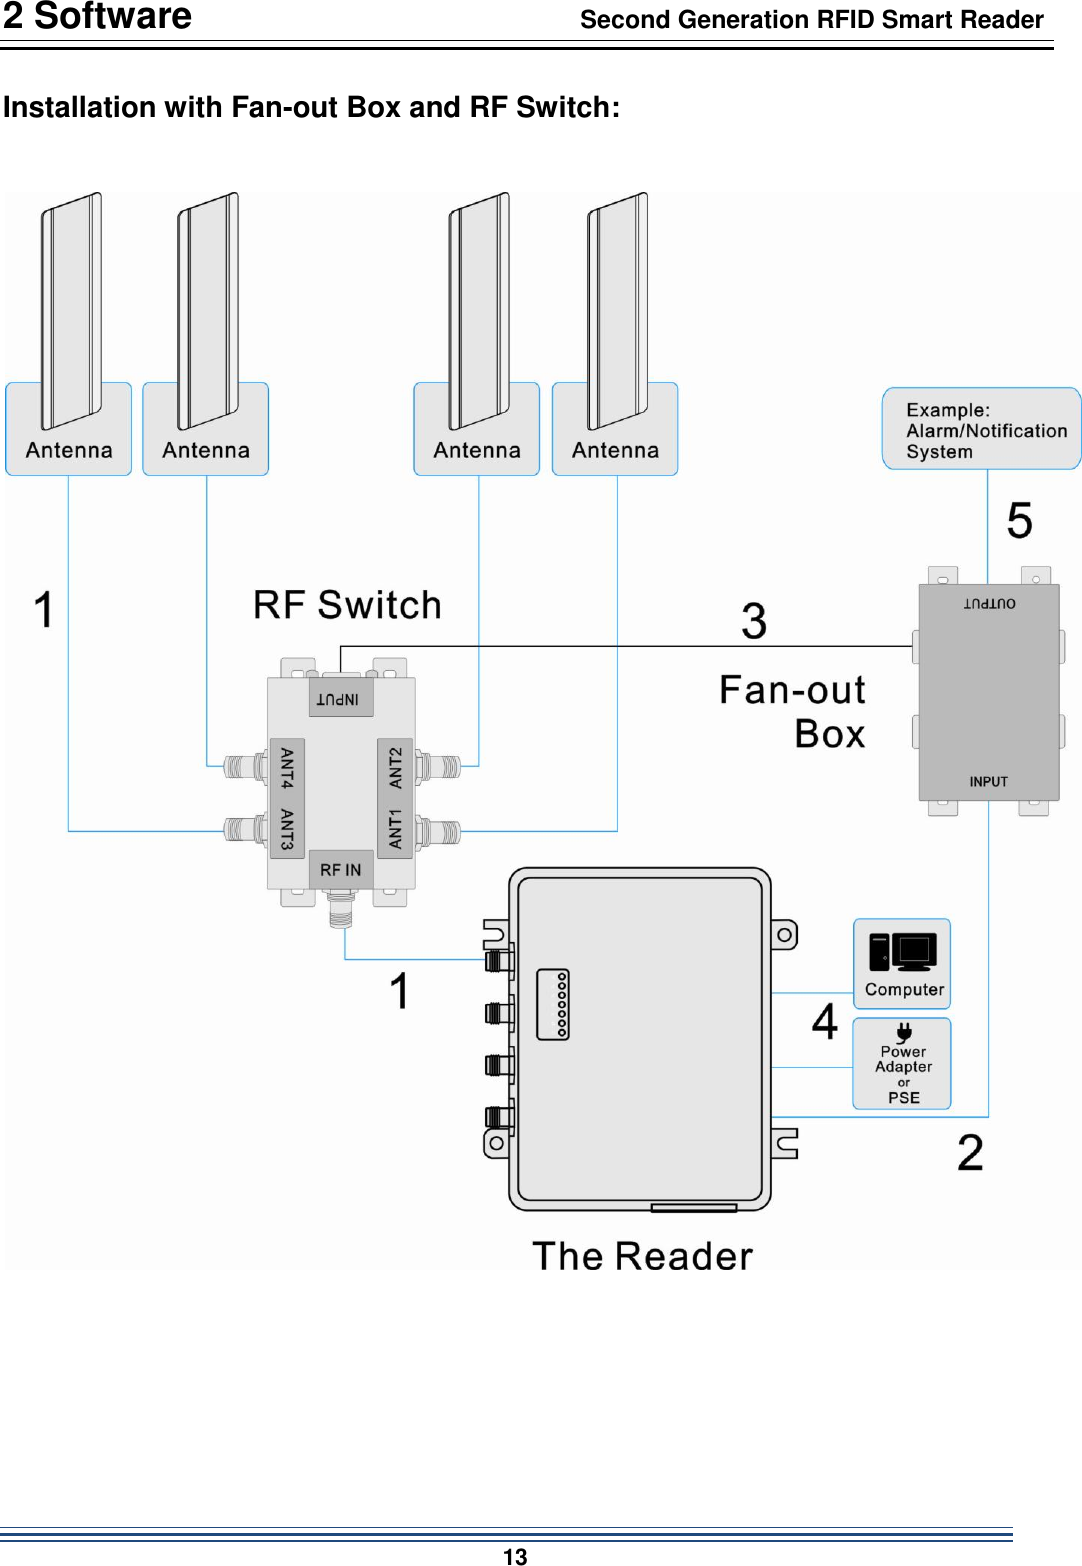 2 Software                                  Second Generation RFID Smart Reader                           13  Installation with Fan-out Box and RF Switch:      